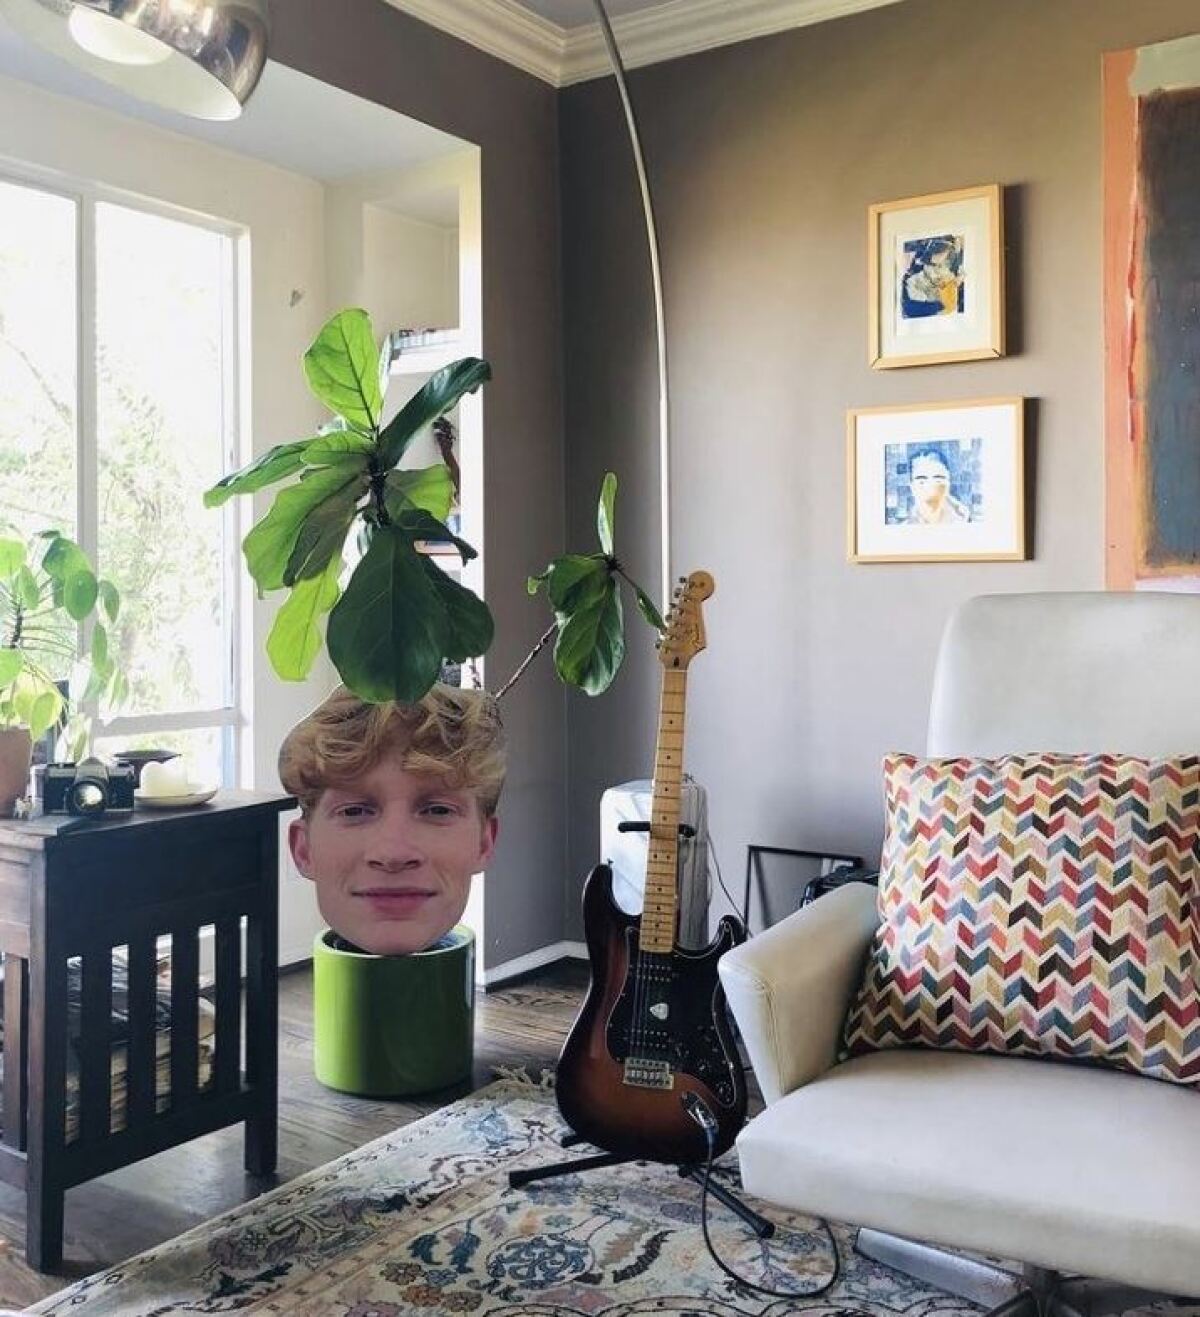 The failing fiddle-leaf plant, adorned with a Fathead cutout of the author's son's face.